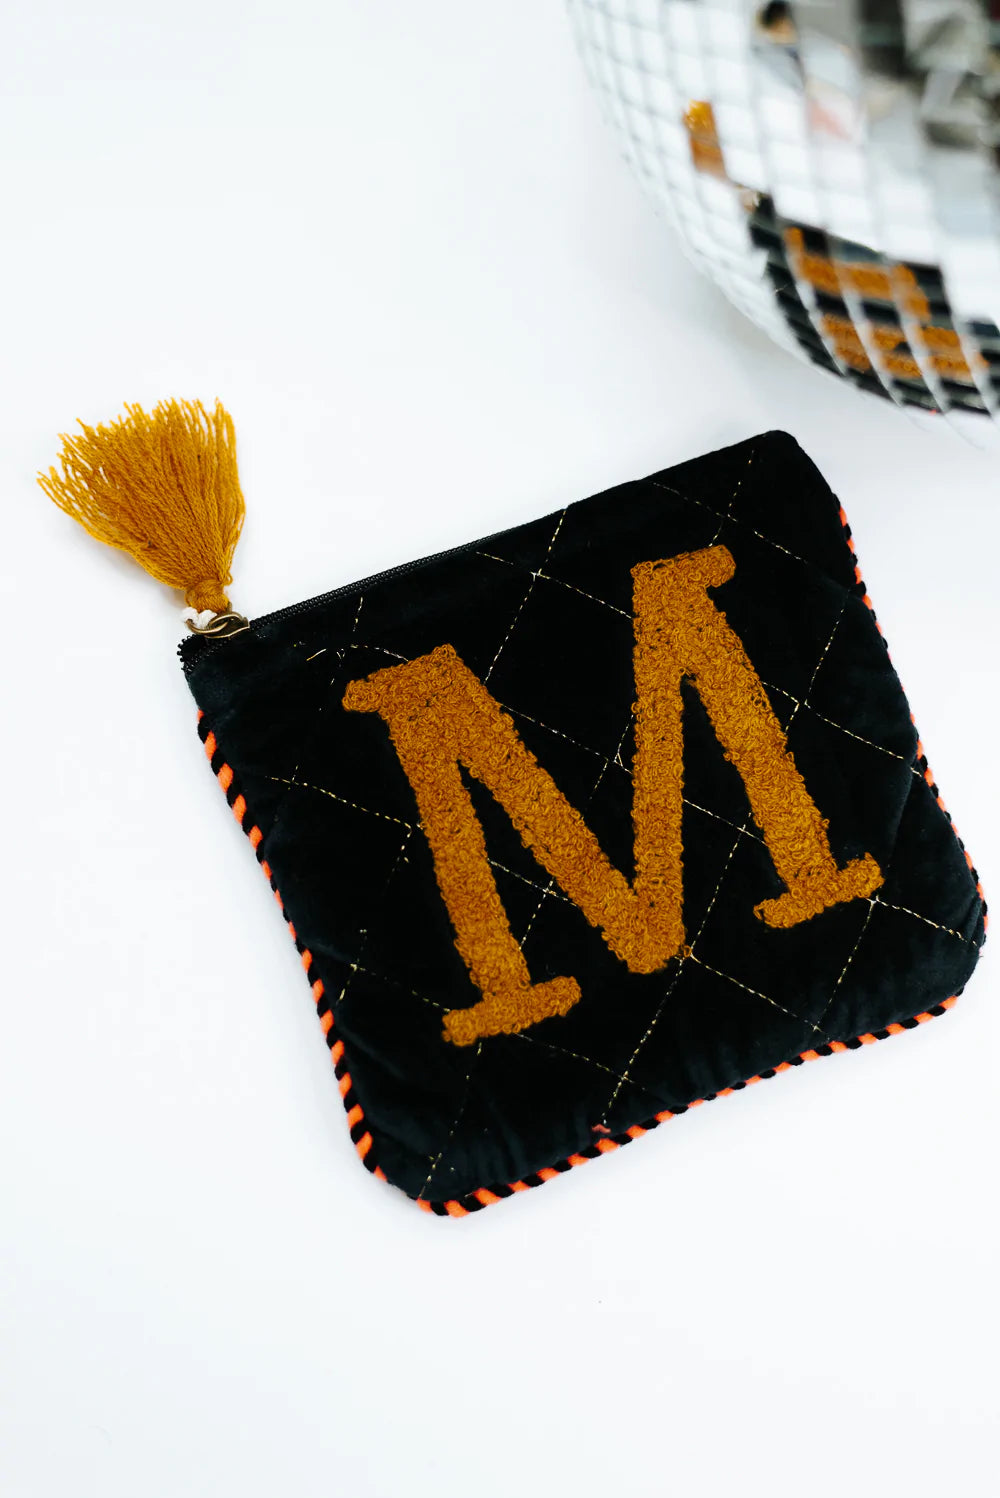 Embroidered Initial Velvet Pouch